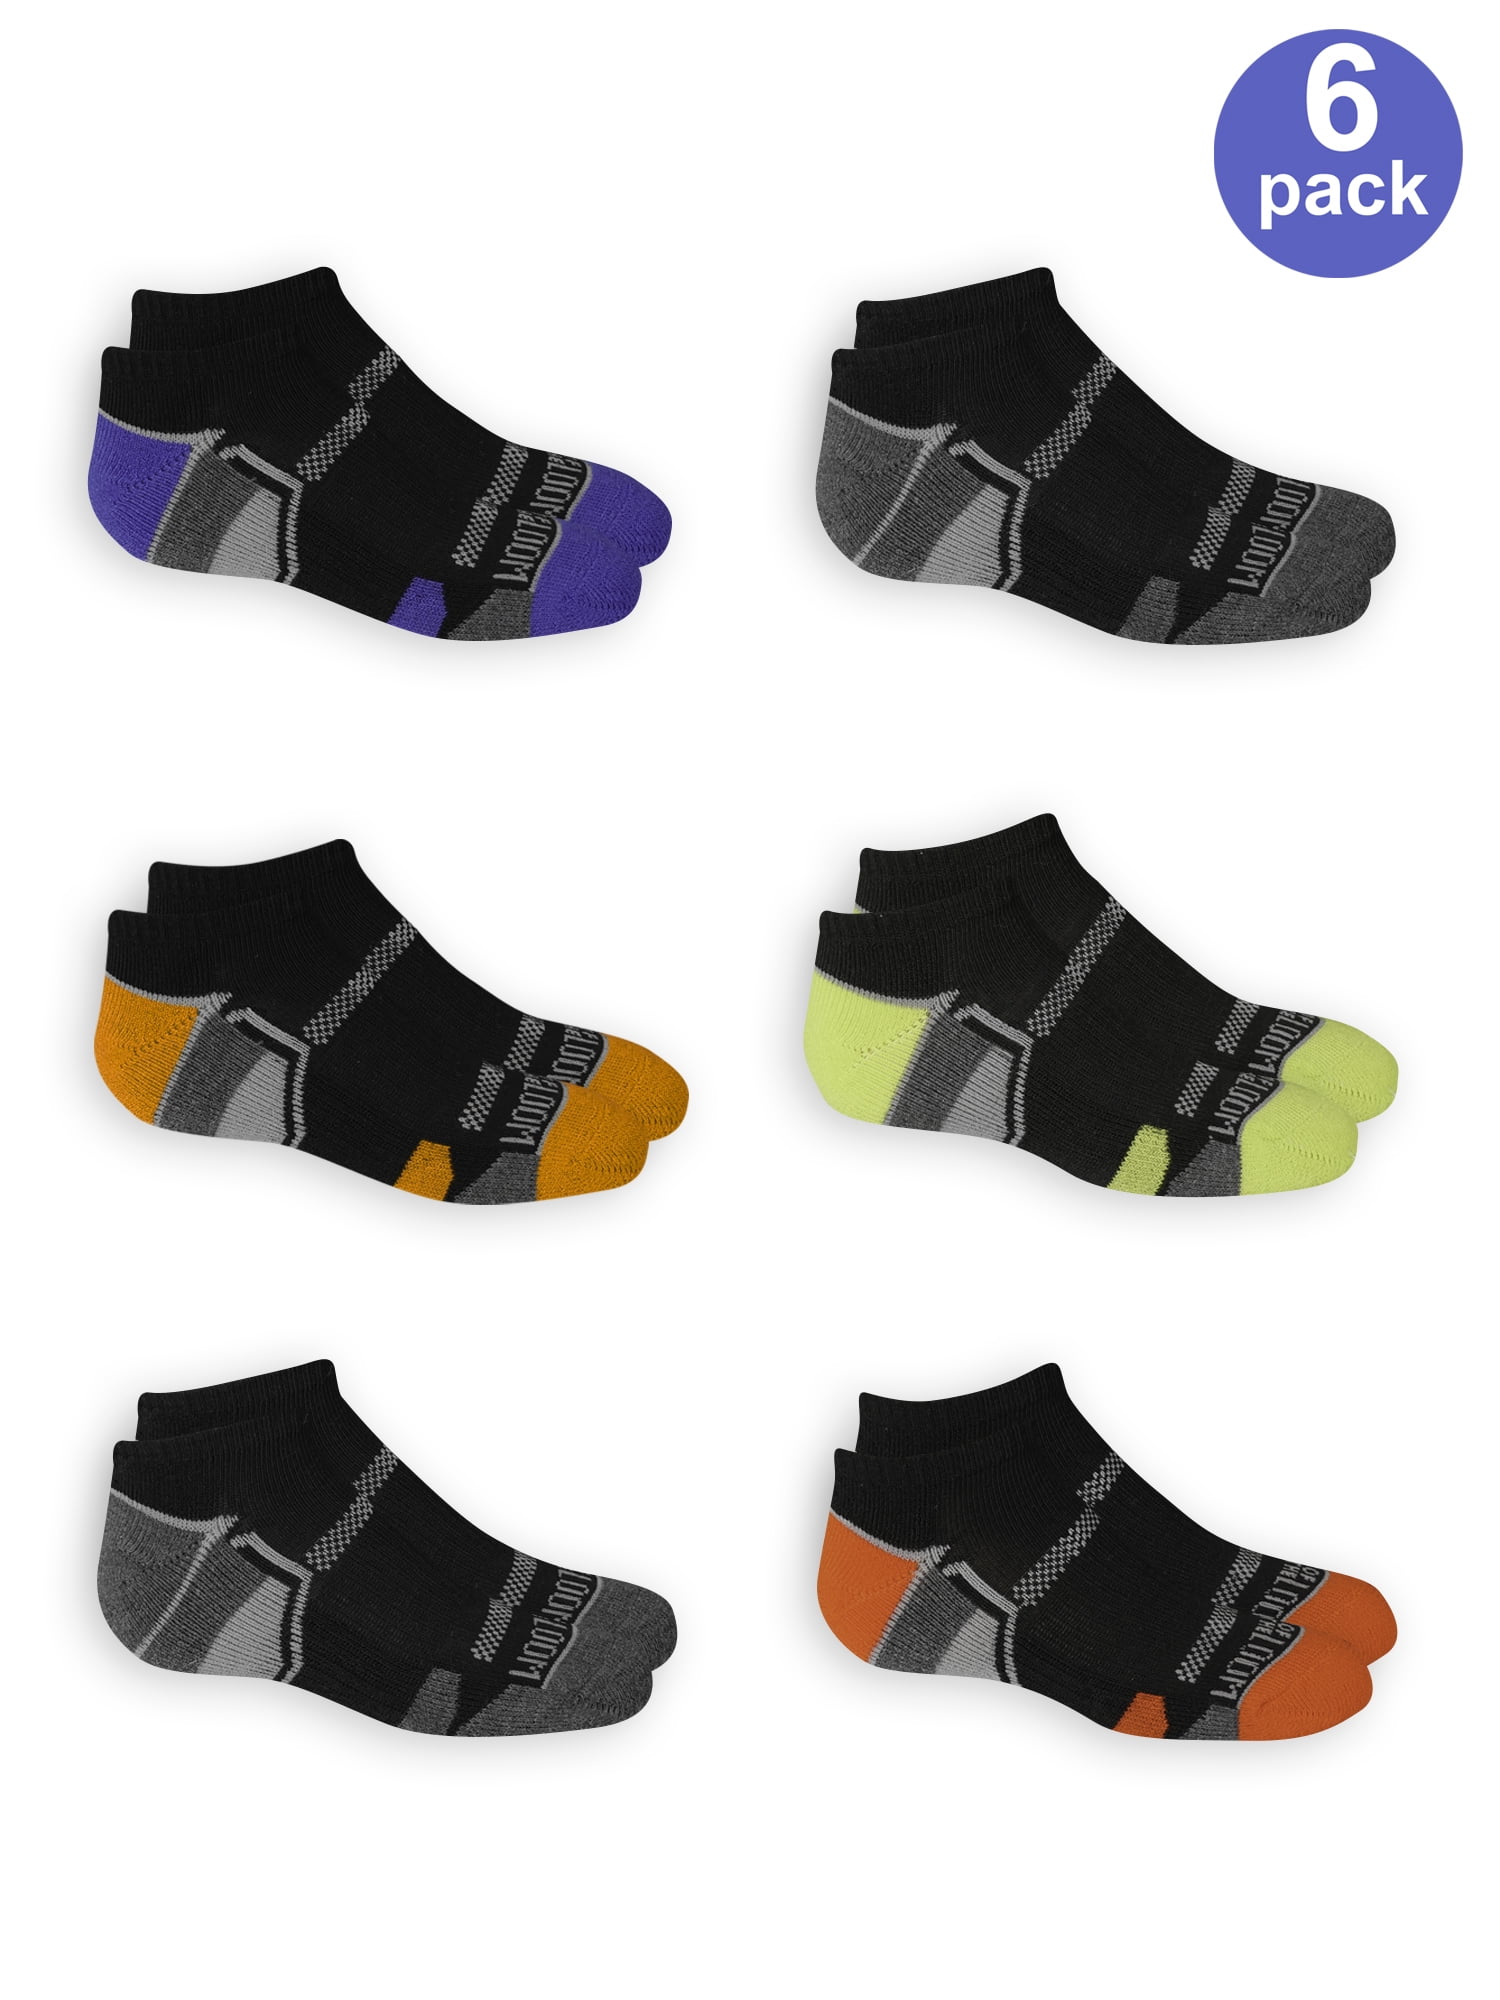 Fruit of the Loom Boys 6 Pack No Show Eveyday Active Socks